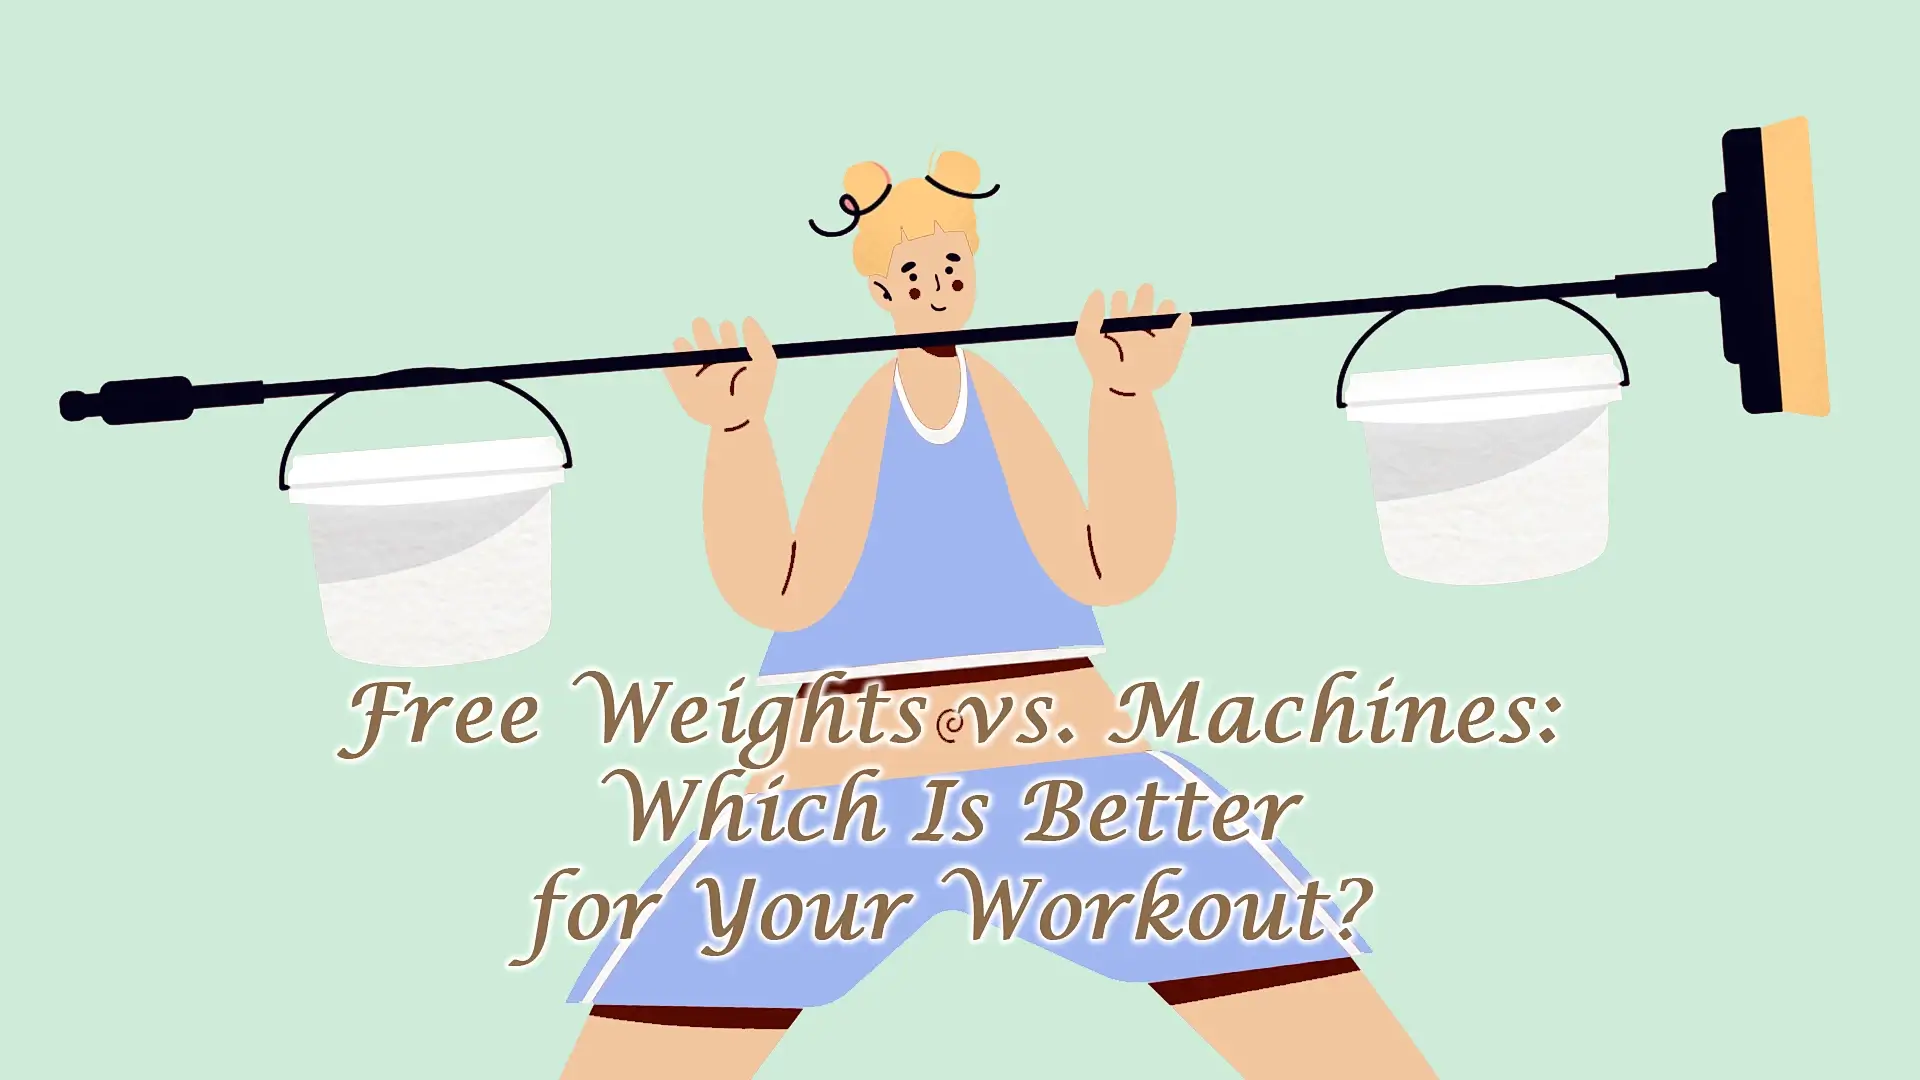 better to use free weights or machines